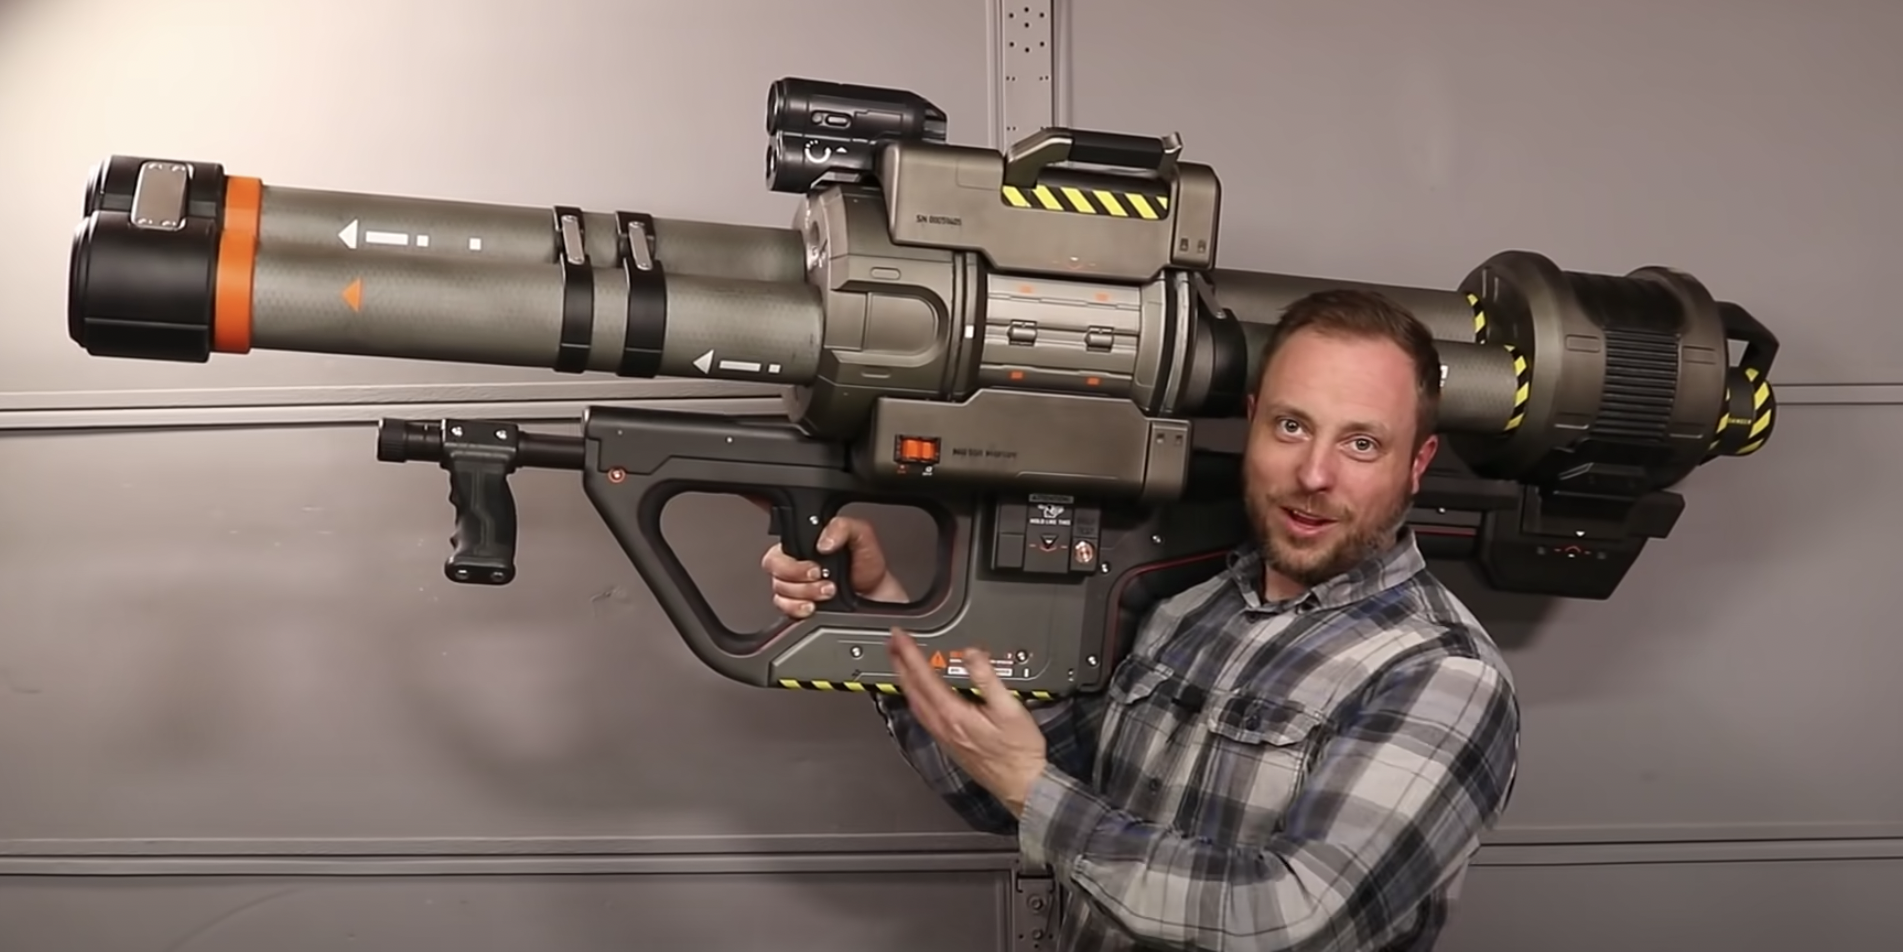 Halo Fan Creates a Functional, Game-Accurate Rocket Launcher